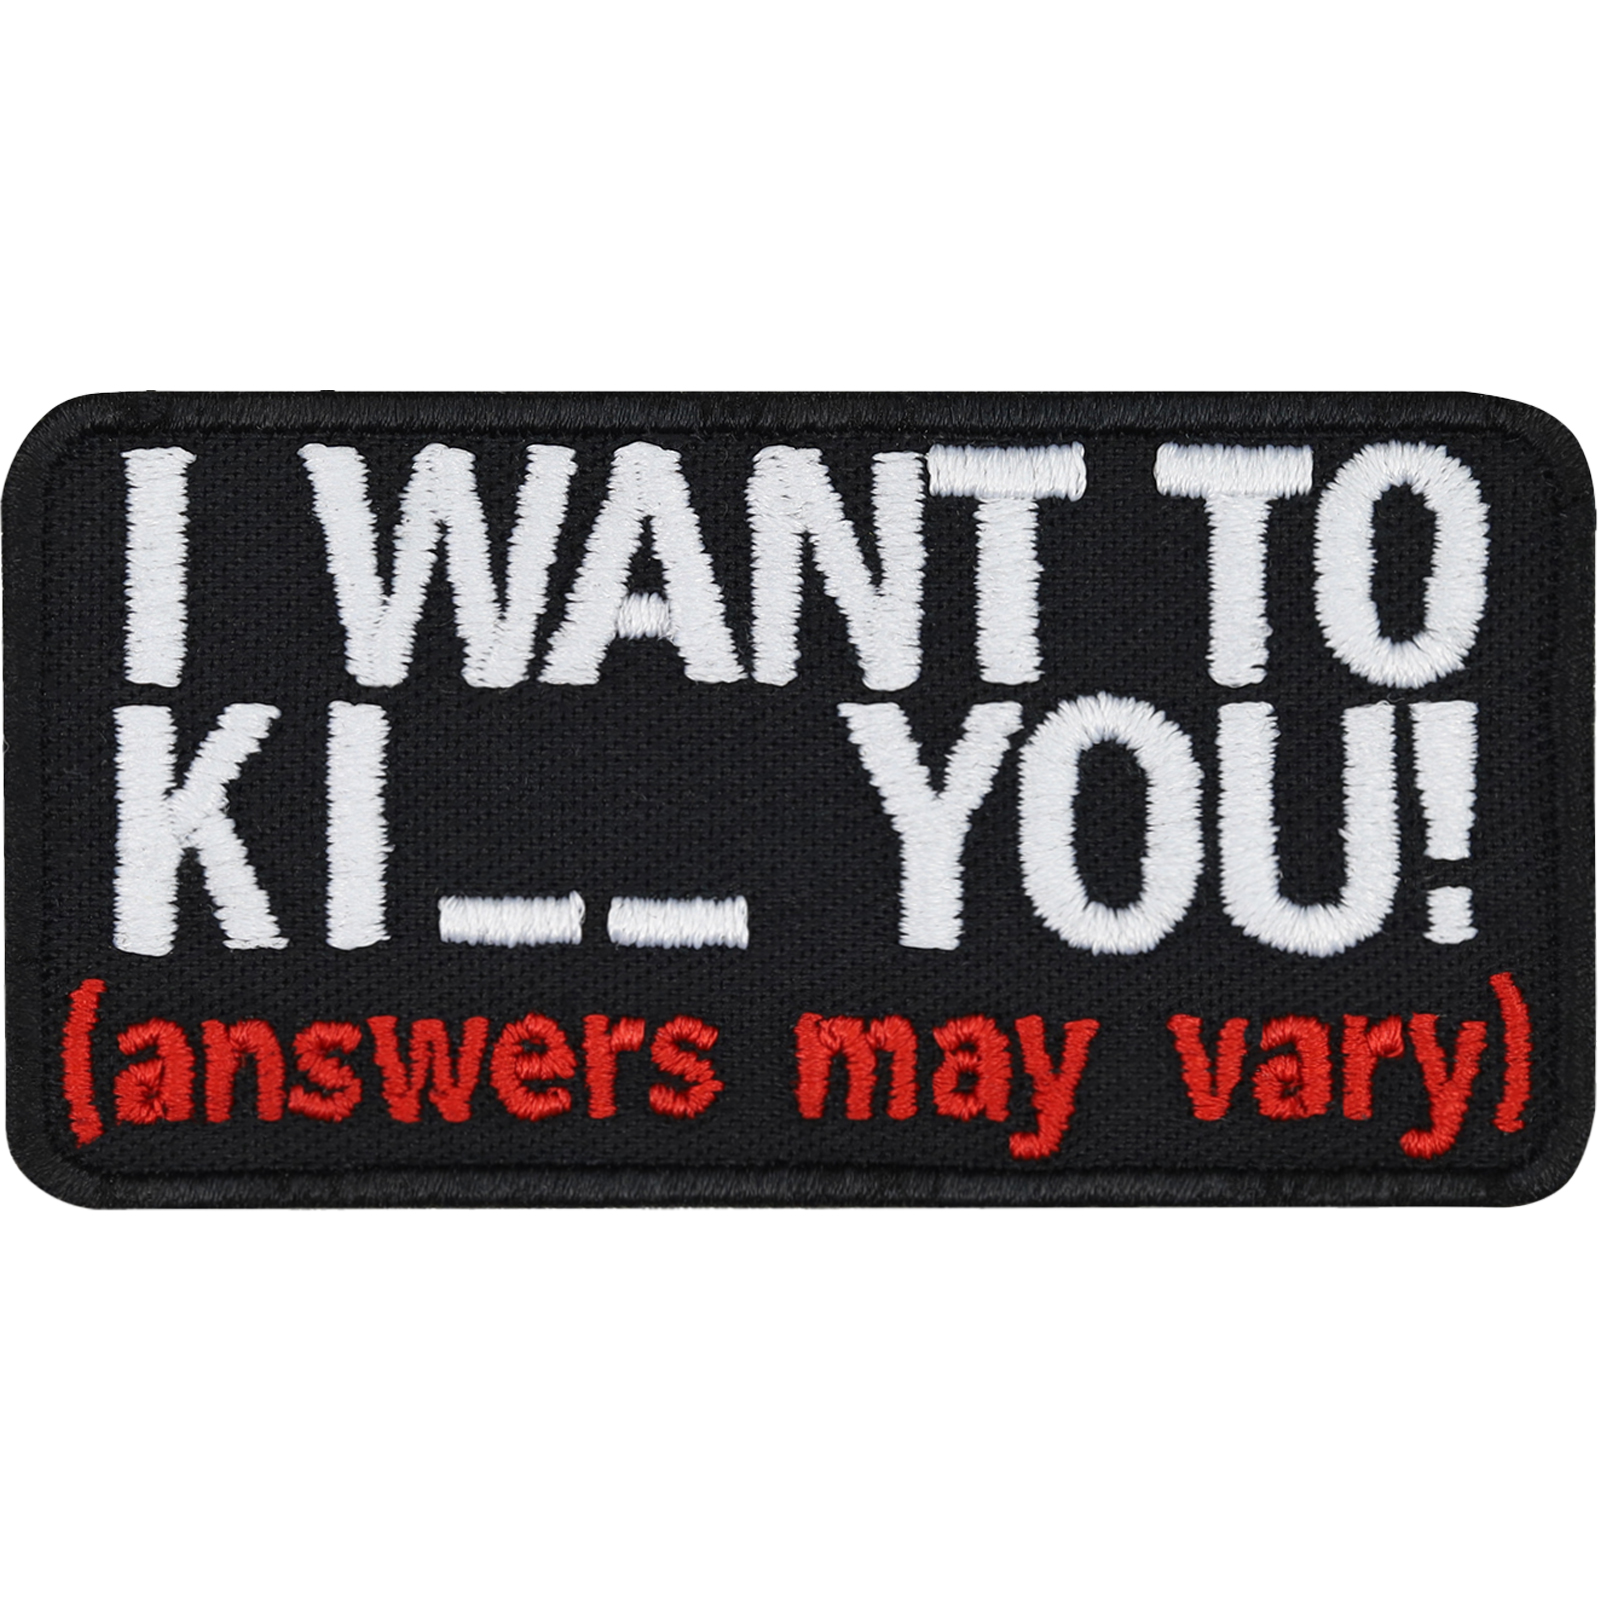 I want to ki.. you (answer may vary) - Patch